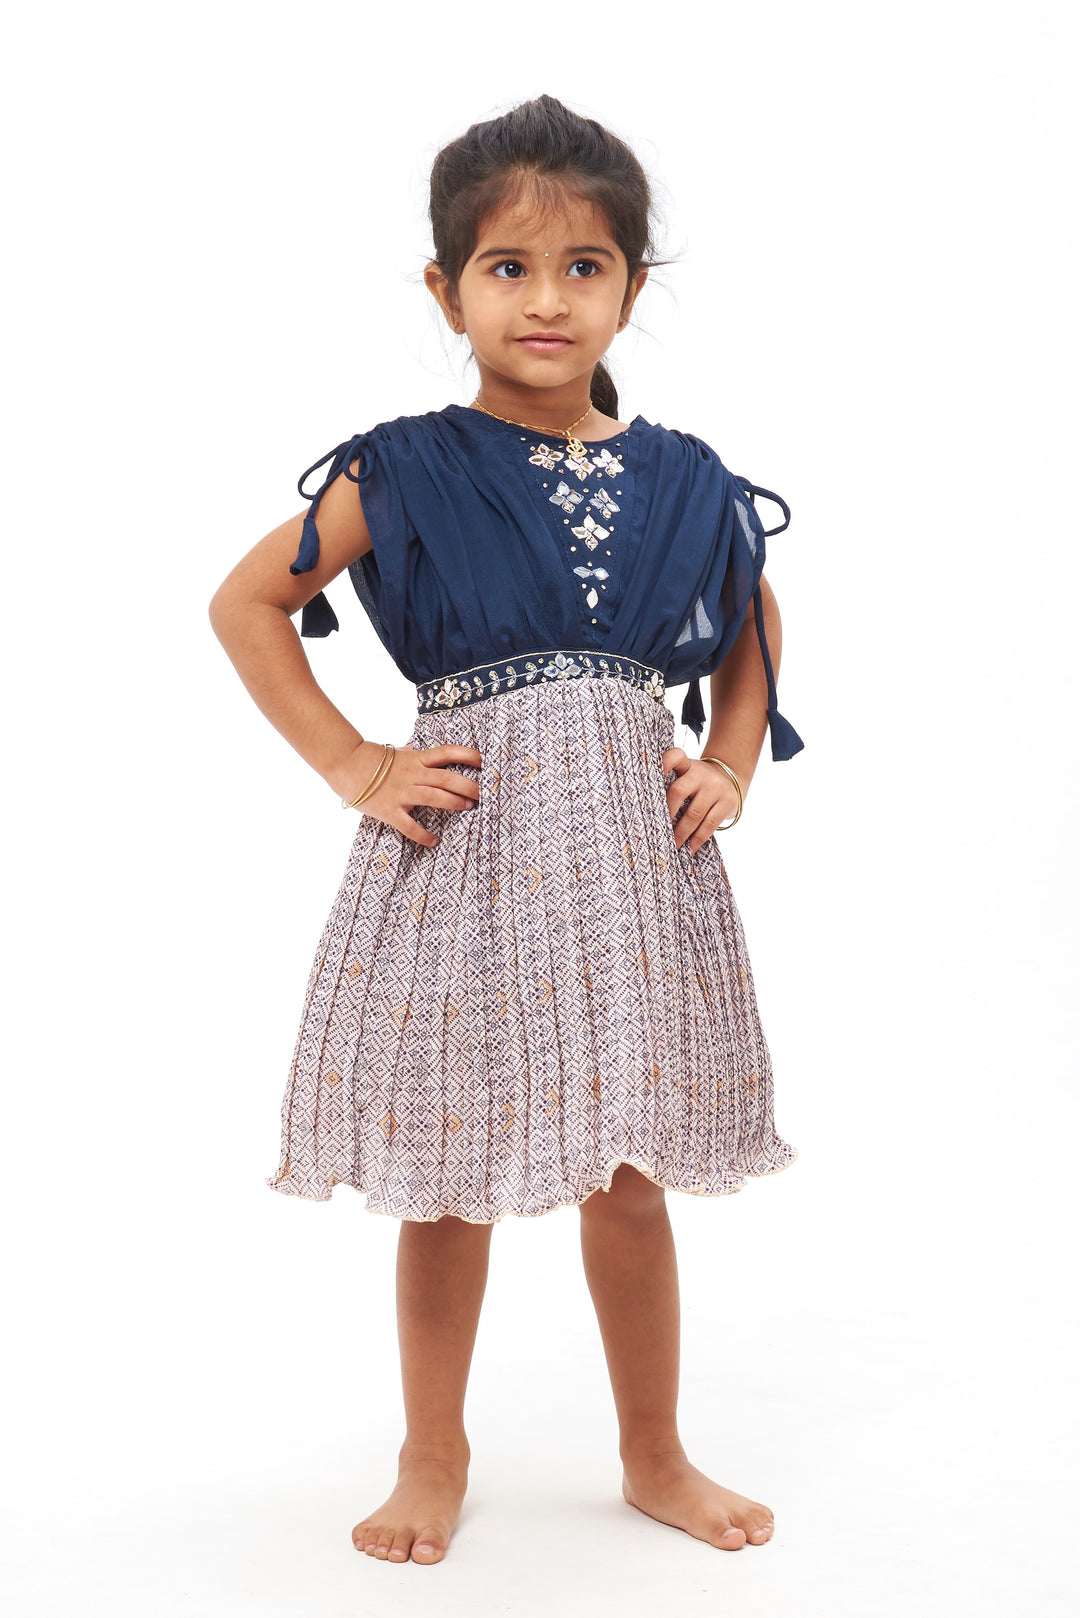 The Nesavu Girls Fancy Party Frock Navy Blue Mirror Embroidered Geometrical Print with Poncho Sleeves Party Frock Nesavu 16 (1Y) / Blue / Organza PF163A-16 Mirror Embroidered Frock | Geometrical Print with Poncho Sleeves for Girls | The Nesavu